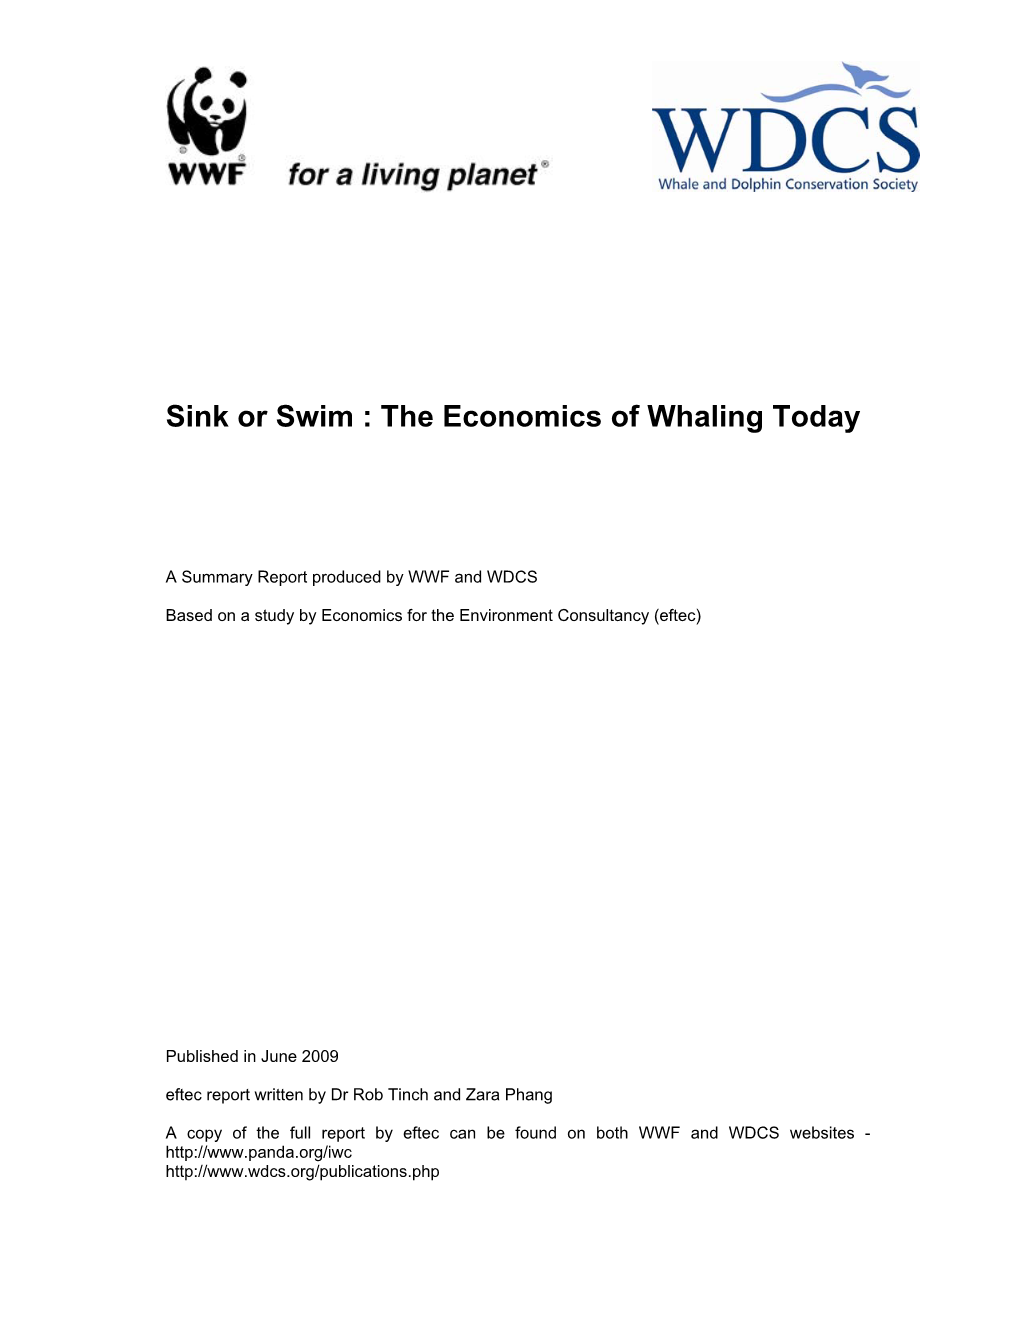 Sink Or Swim : the Economics of Whaling Today